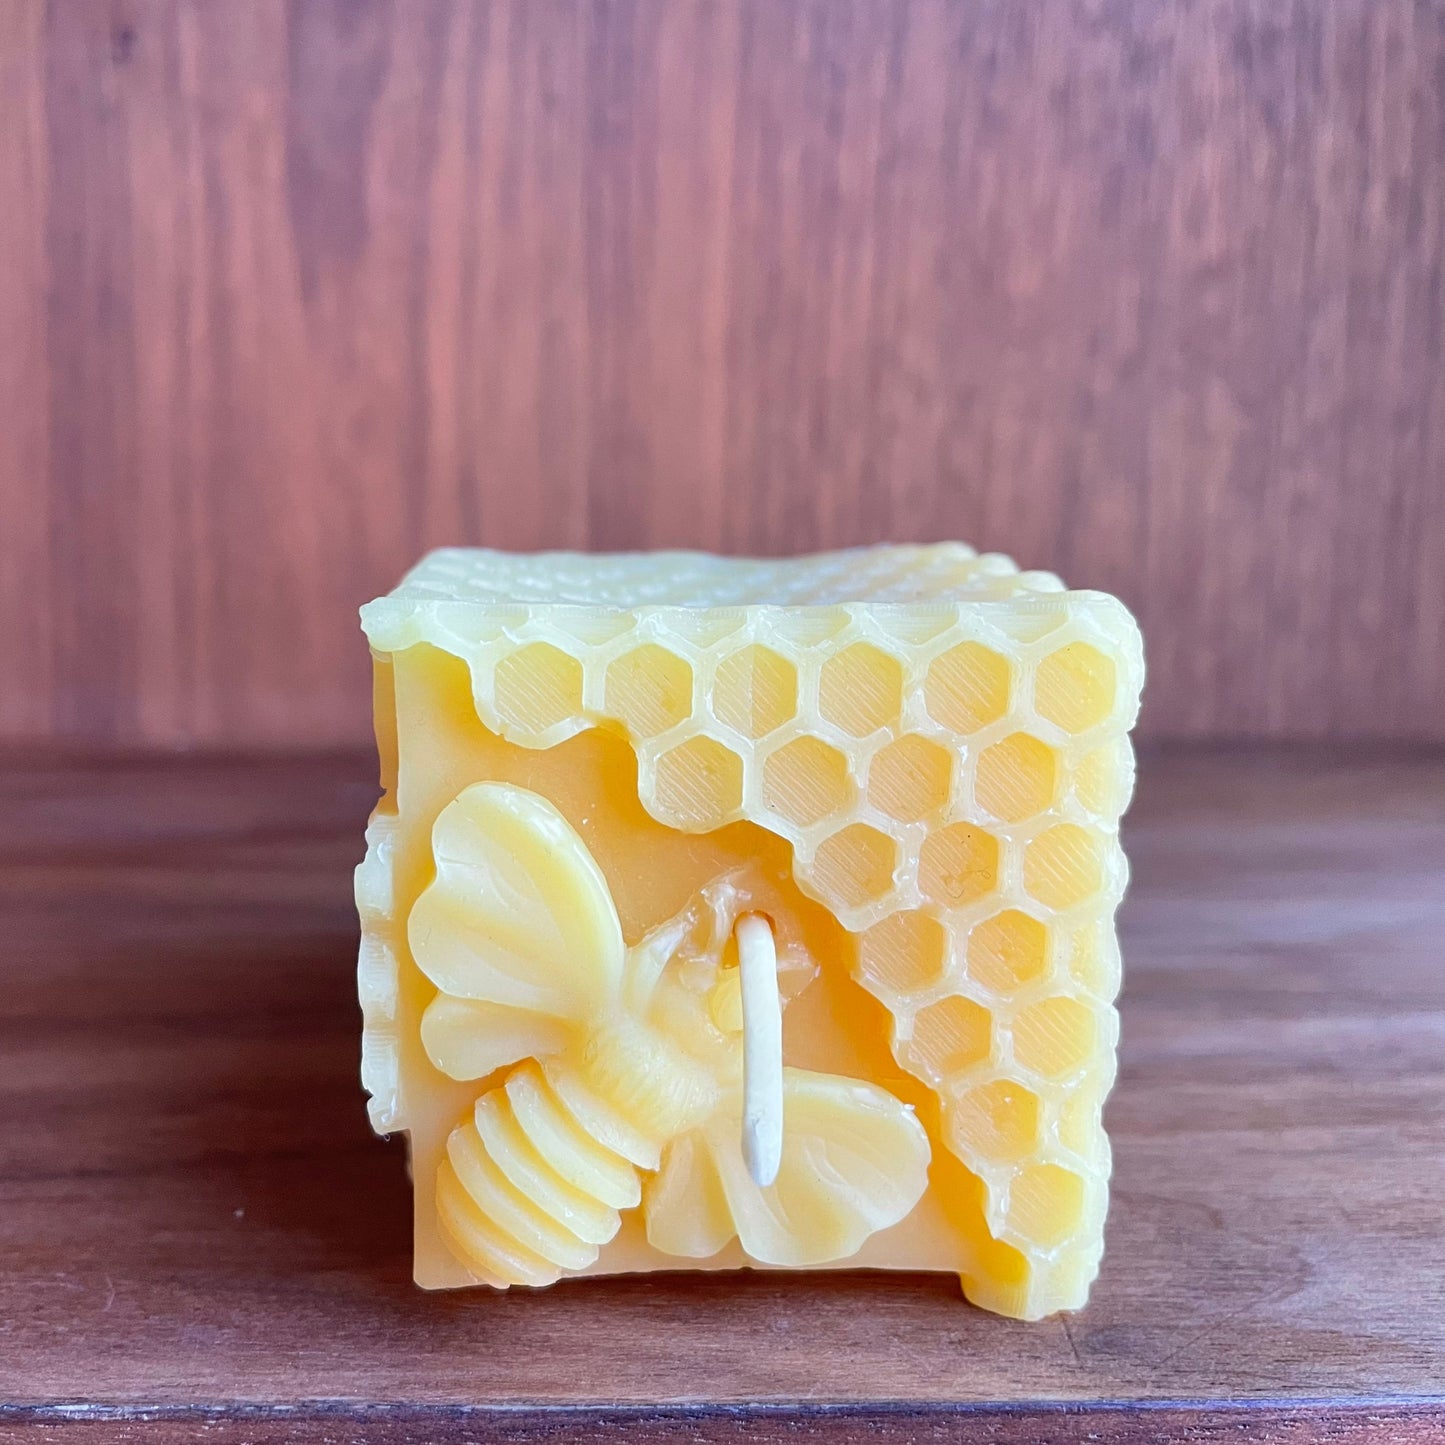 Cube Honeycomb- 100% Pure Beeswax Candle  2x2 inches